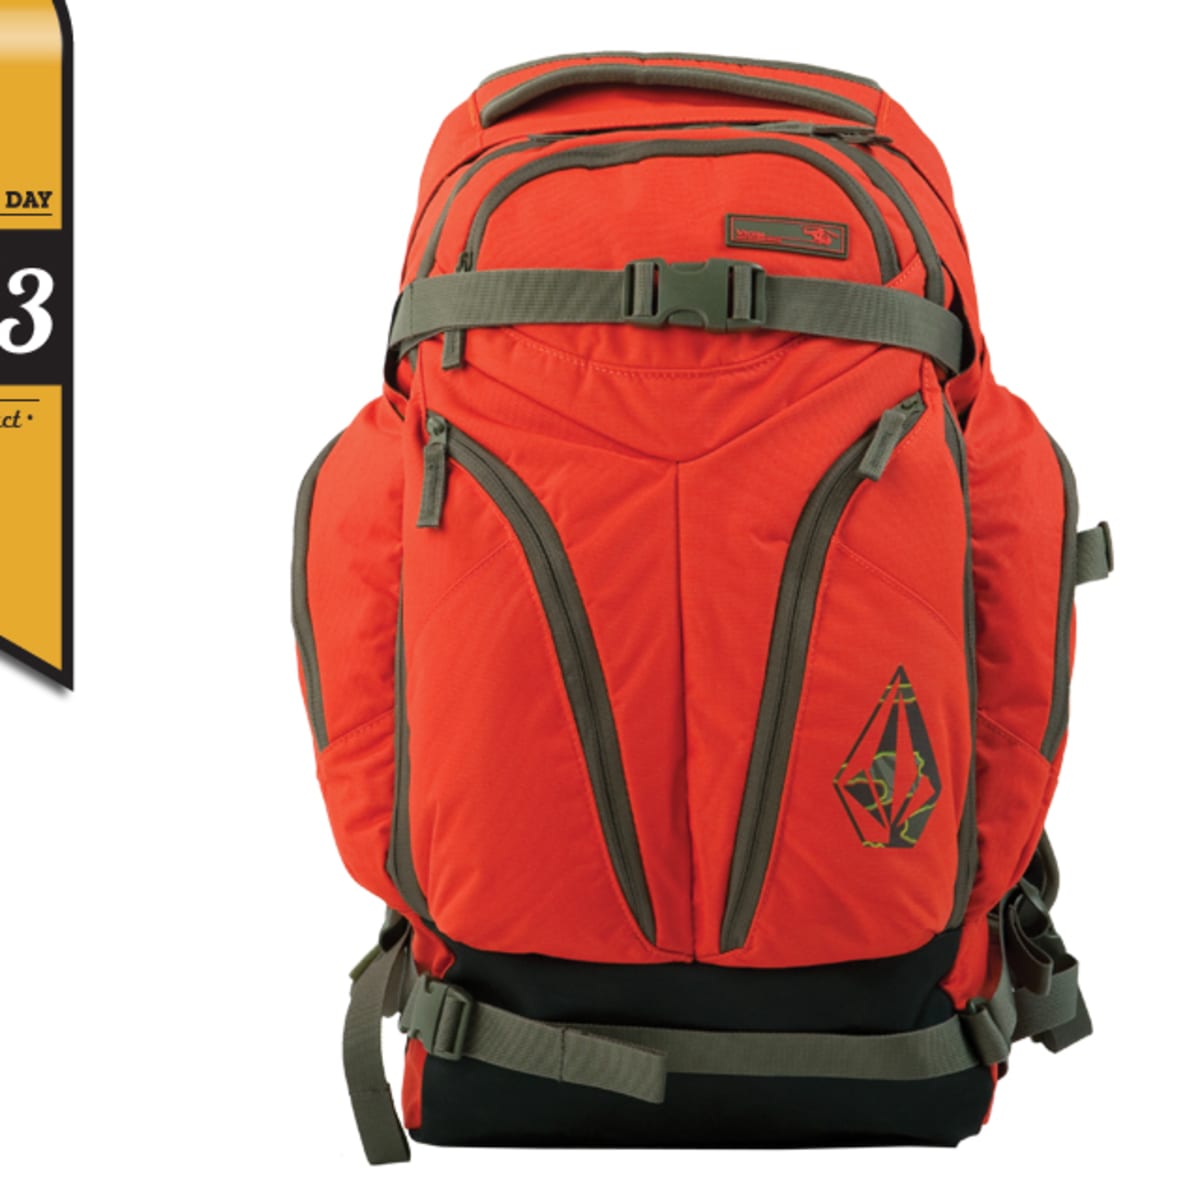 Gear of the Day: Volcom Heli Pack - Snowboarder